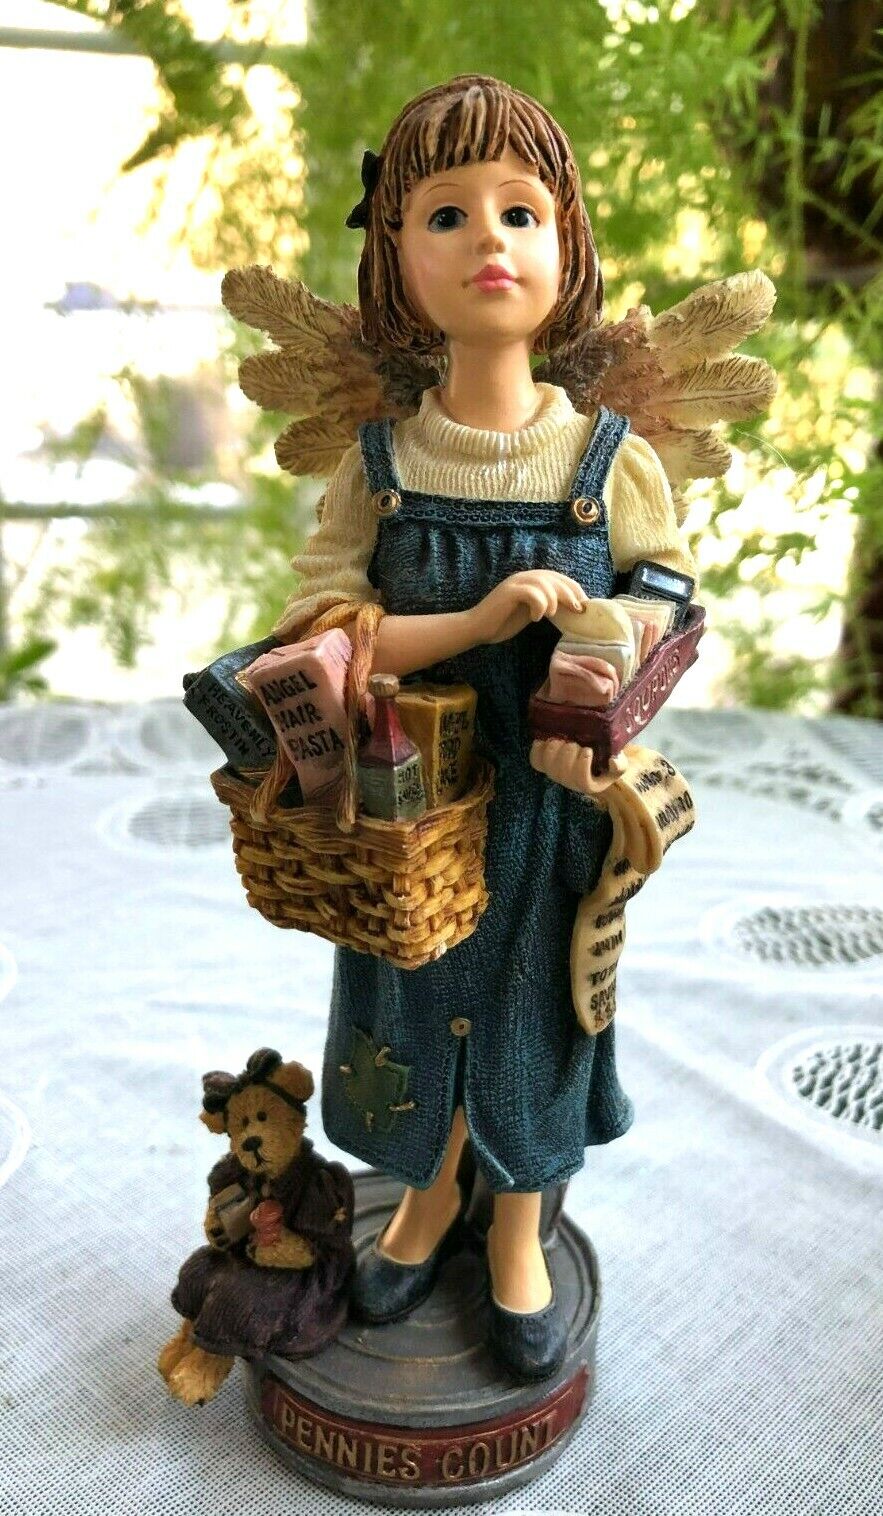 BOYDS FOLKSTONE COLLECTION -ANGEL-CALLIOPE CLIPSALOT...GUARDIAN ANGEL OF PENNIES